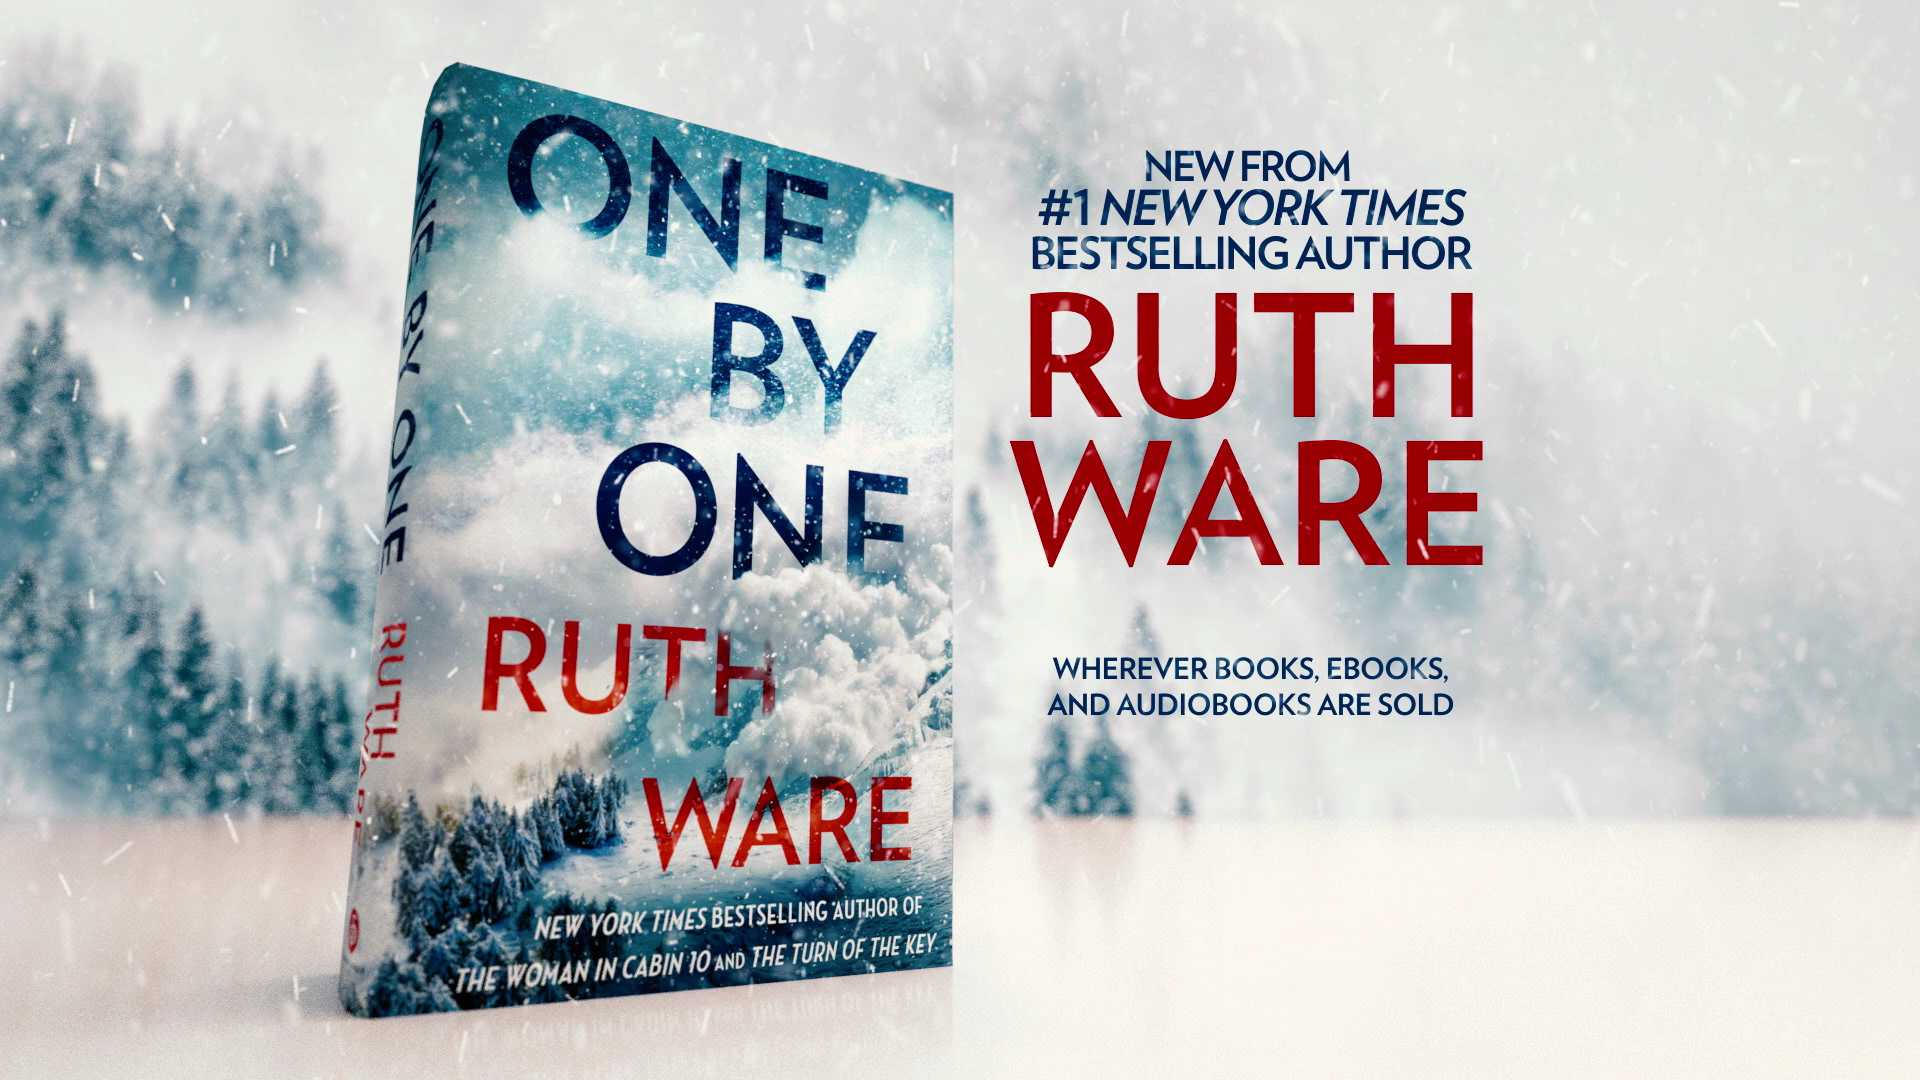 ruth ware books one by one